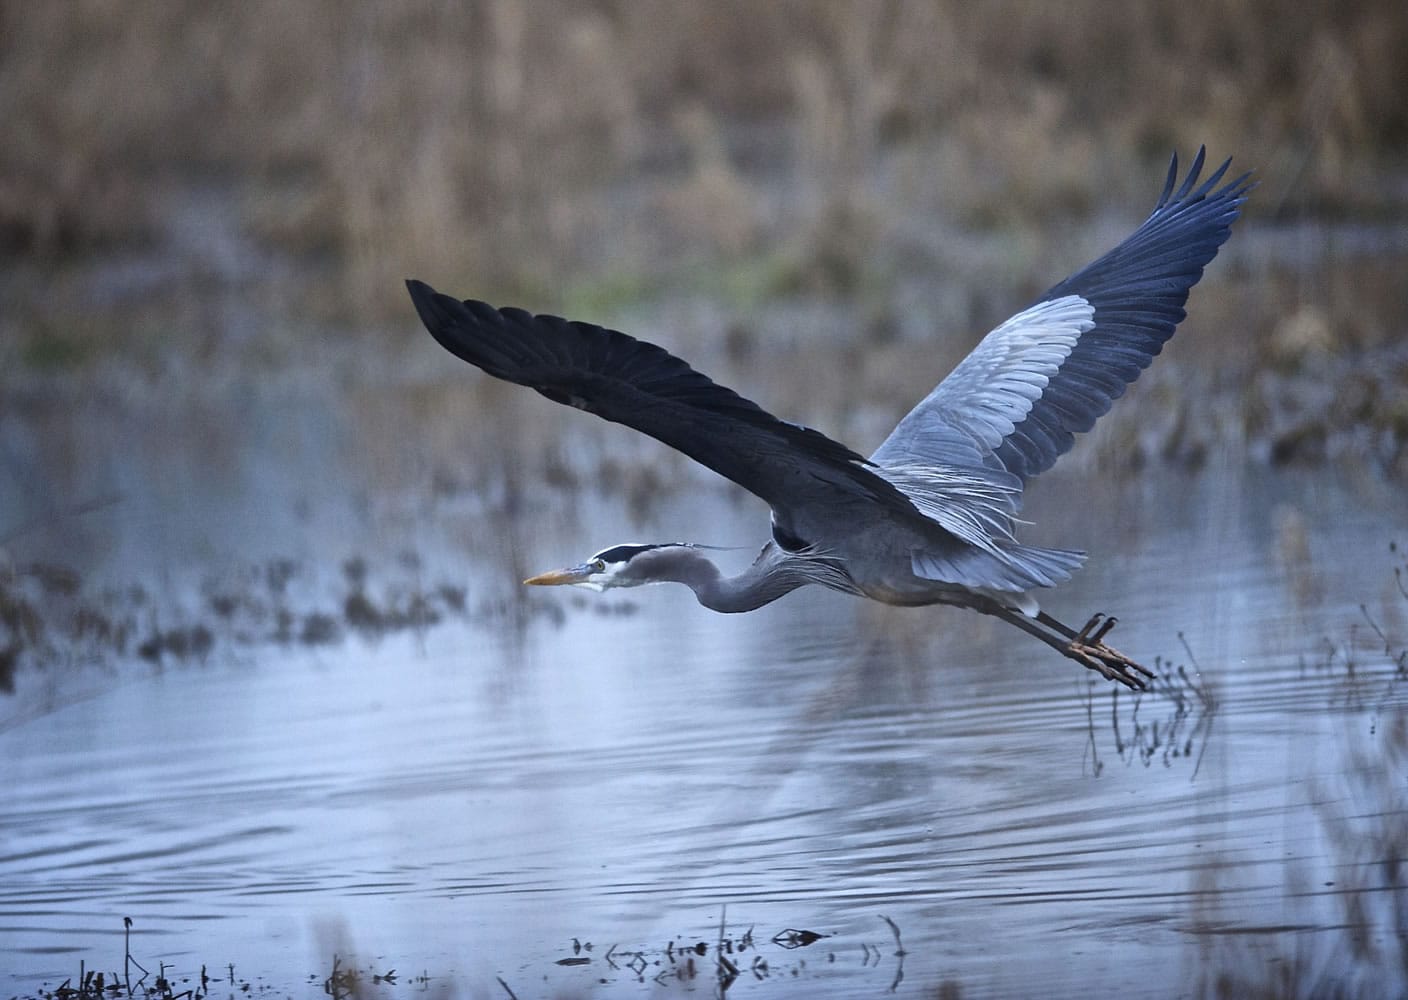 A Great Blue Heron takes flight at the Ridgefield National Wildlife Refuge.